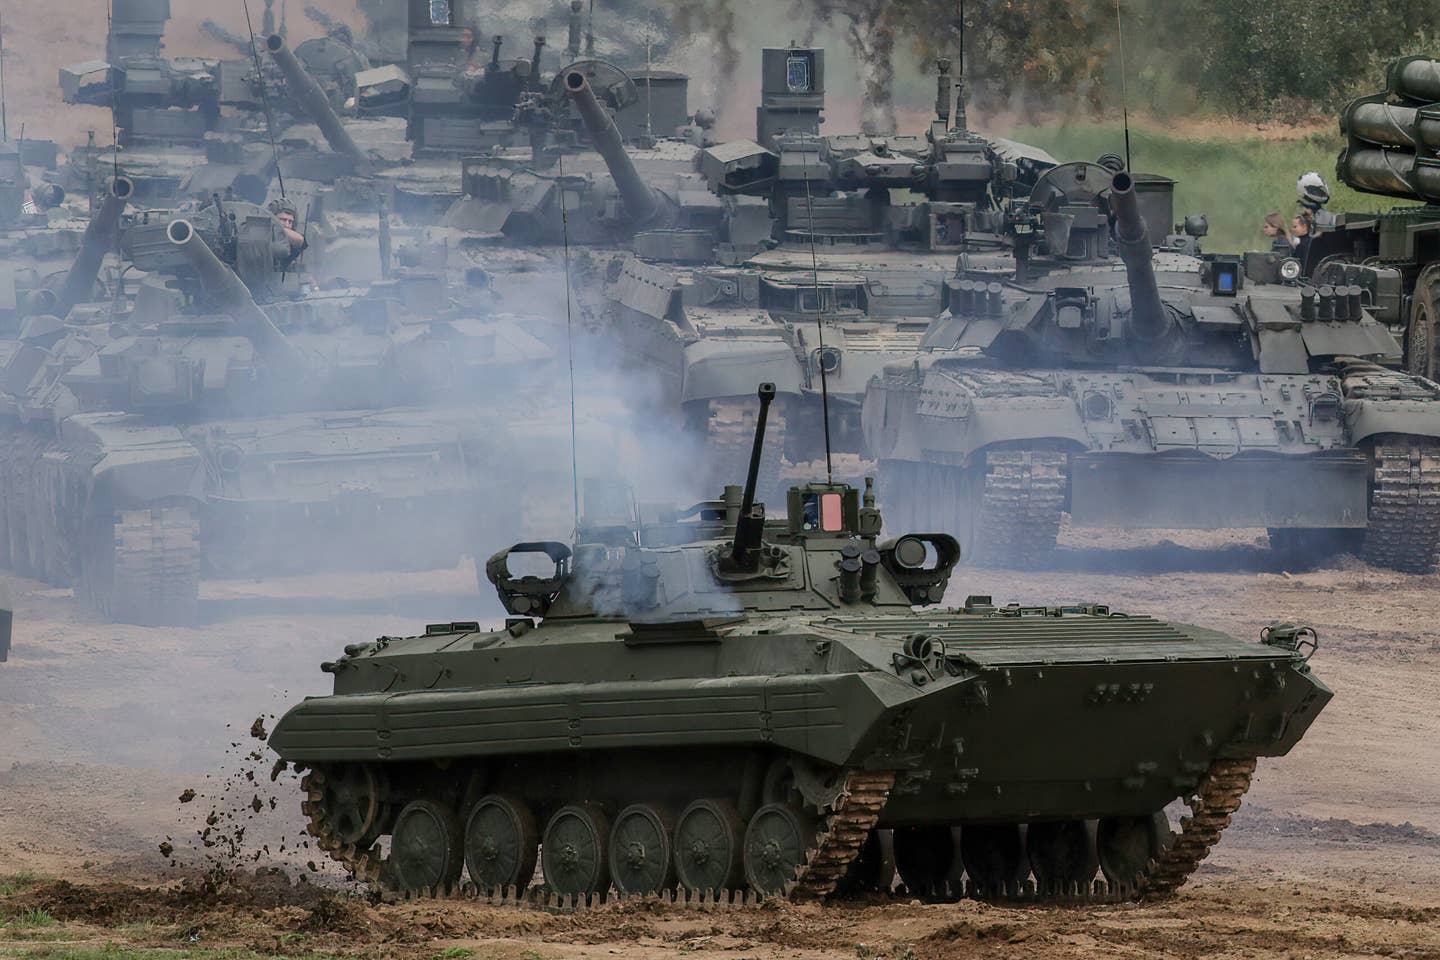 Russian Army BMP-2 infantry fighting vehicle seen during the annual Army Games defense technology international exhibition. <em>Credit: Photo by Leonid Faerberg/SOPA Images/LightRocket via Getty Images</em>